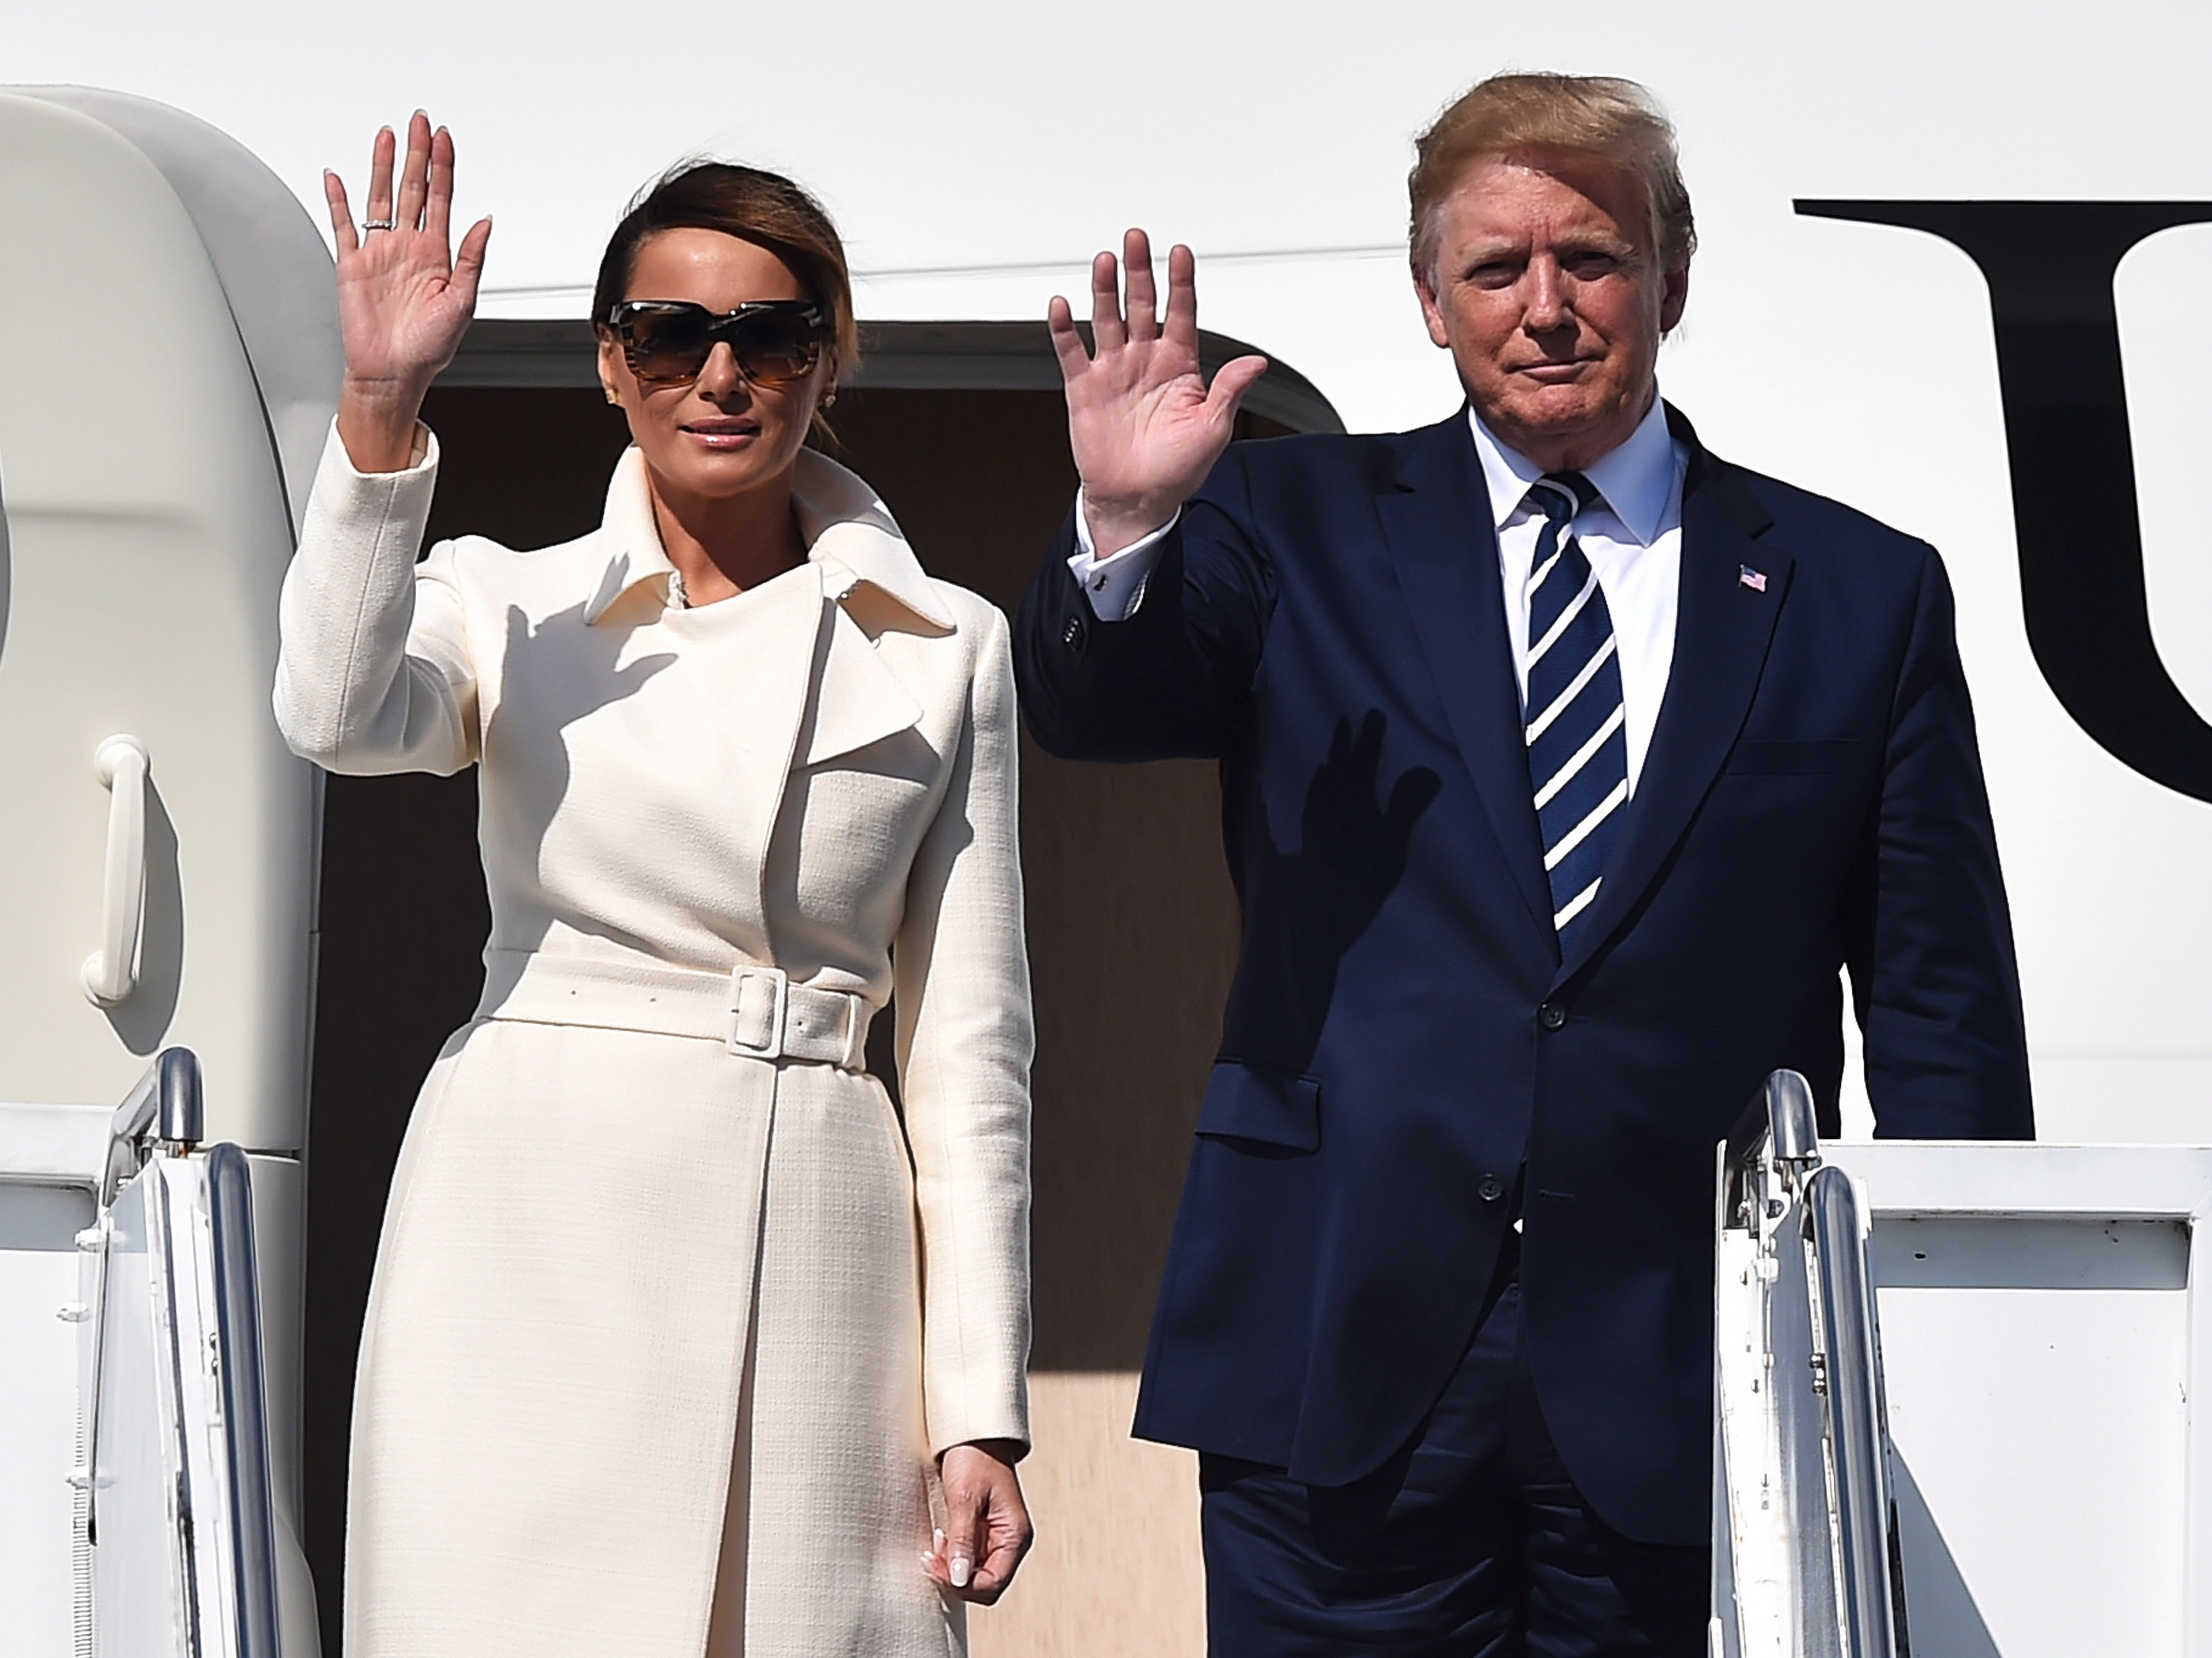 President Donald Trump and his wife Melania Trump arrive in Portsmouth for the 7th D-Day commemoration in June 2019 | Photo: Getty Images